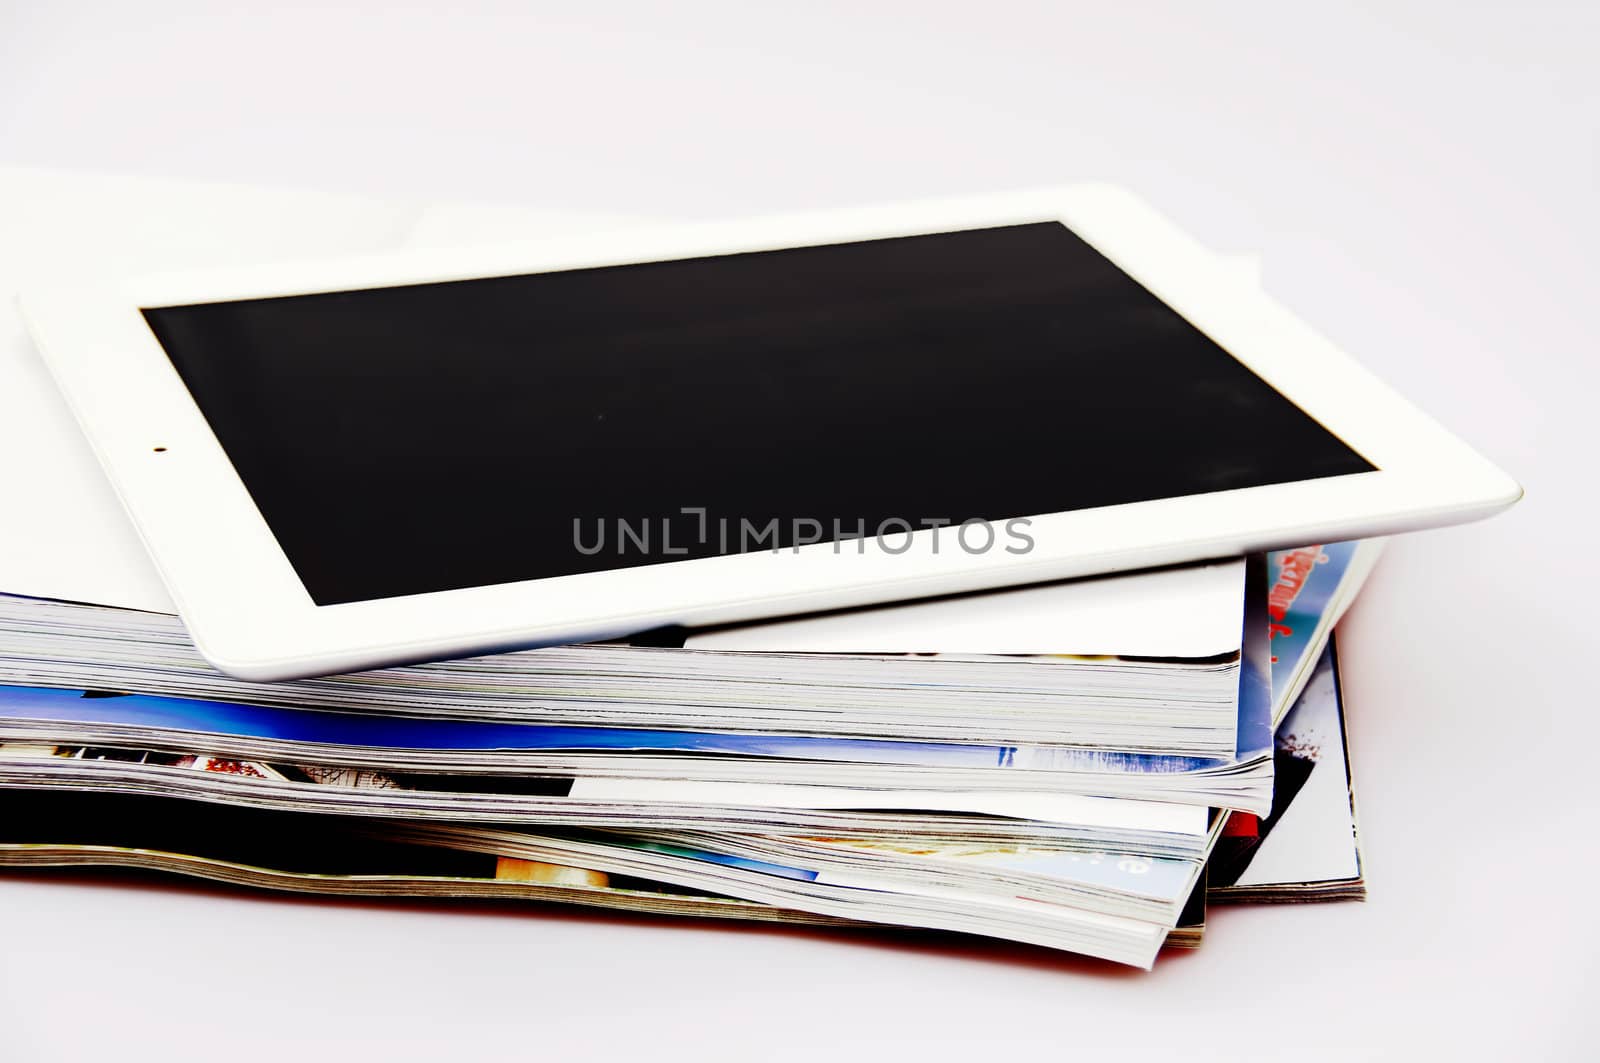 A white tablet on top of a stack of magazines and books